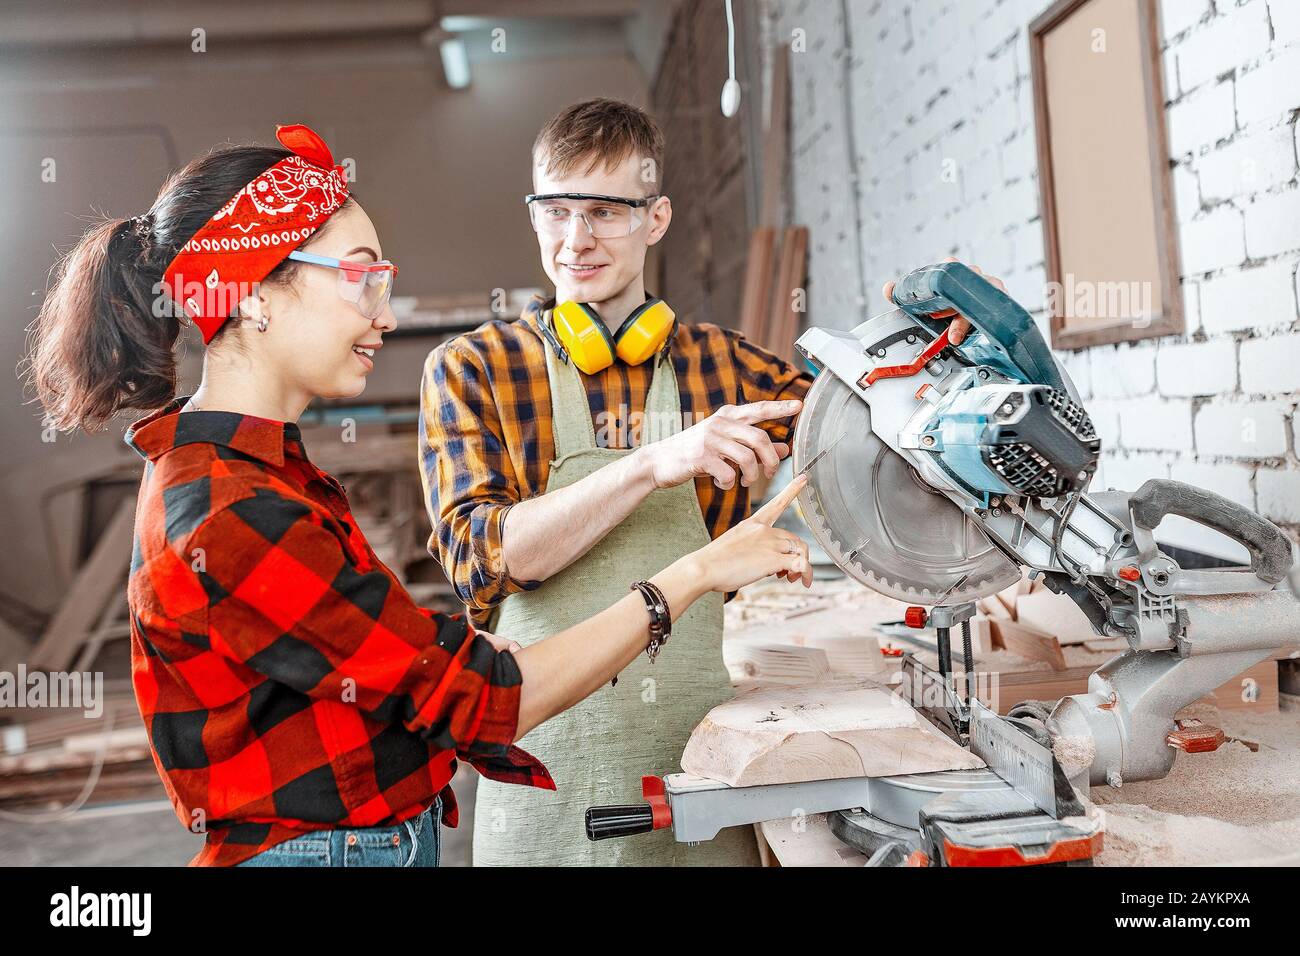 A male craftsman explains to a girl apprentice how to work with an automated saw machine in a factory or workshop Stock Photo